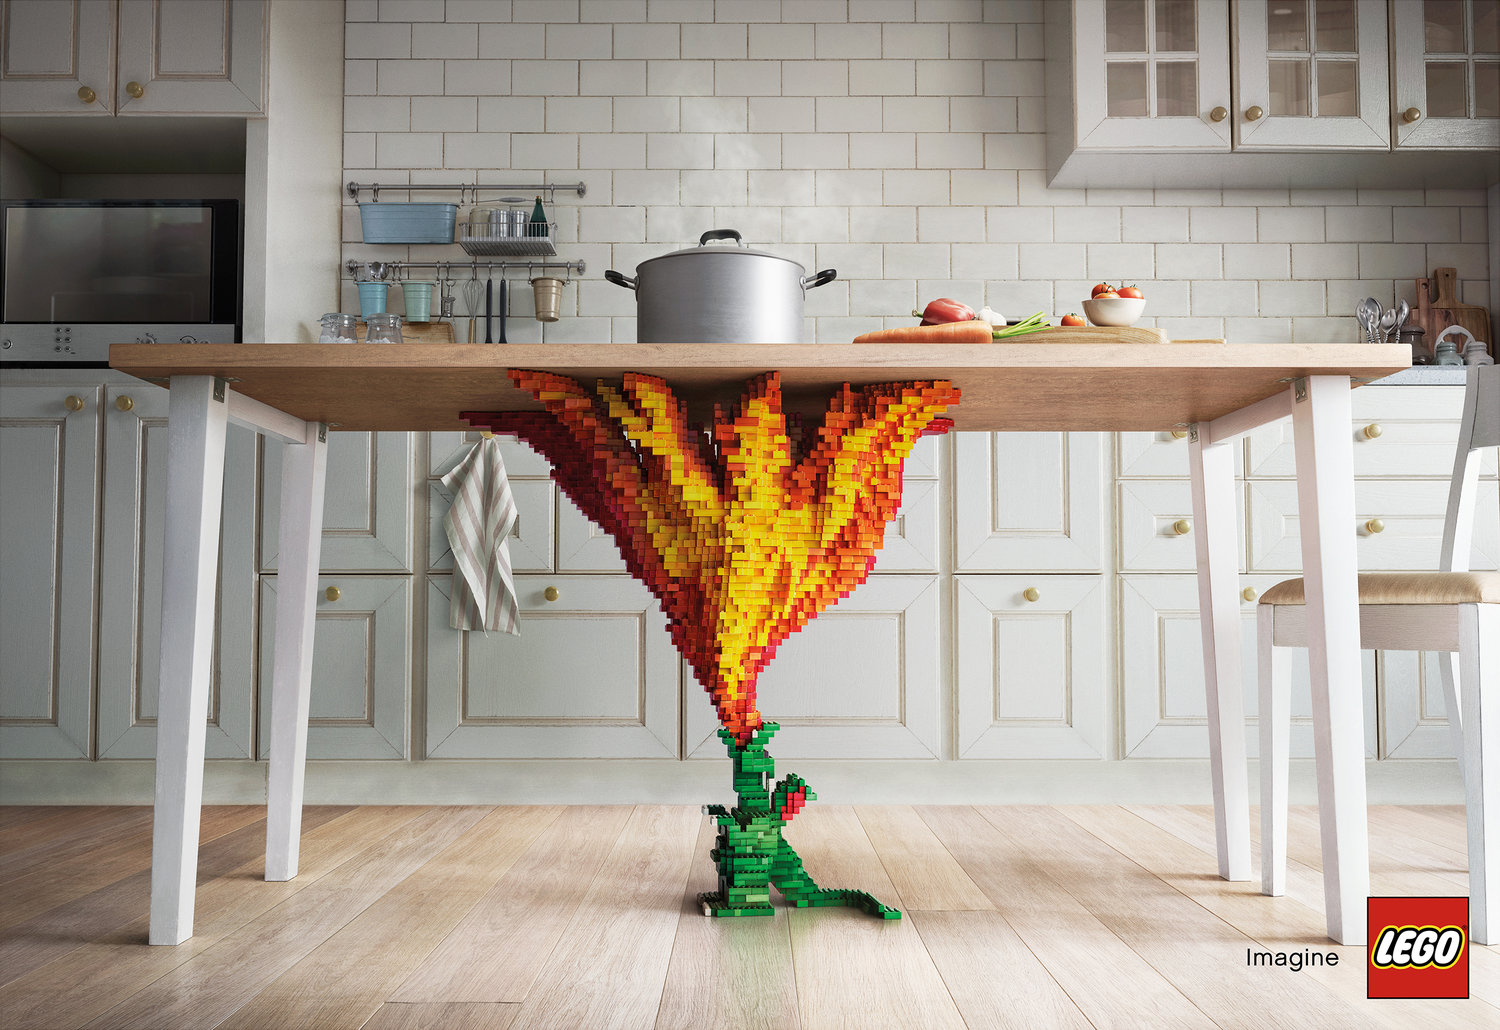 LEGO Toys Bricks Advertisements Logo Kitchen Dragon Table Fire Chair Humor Cooking 1500x1030